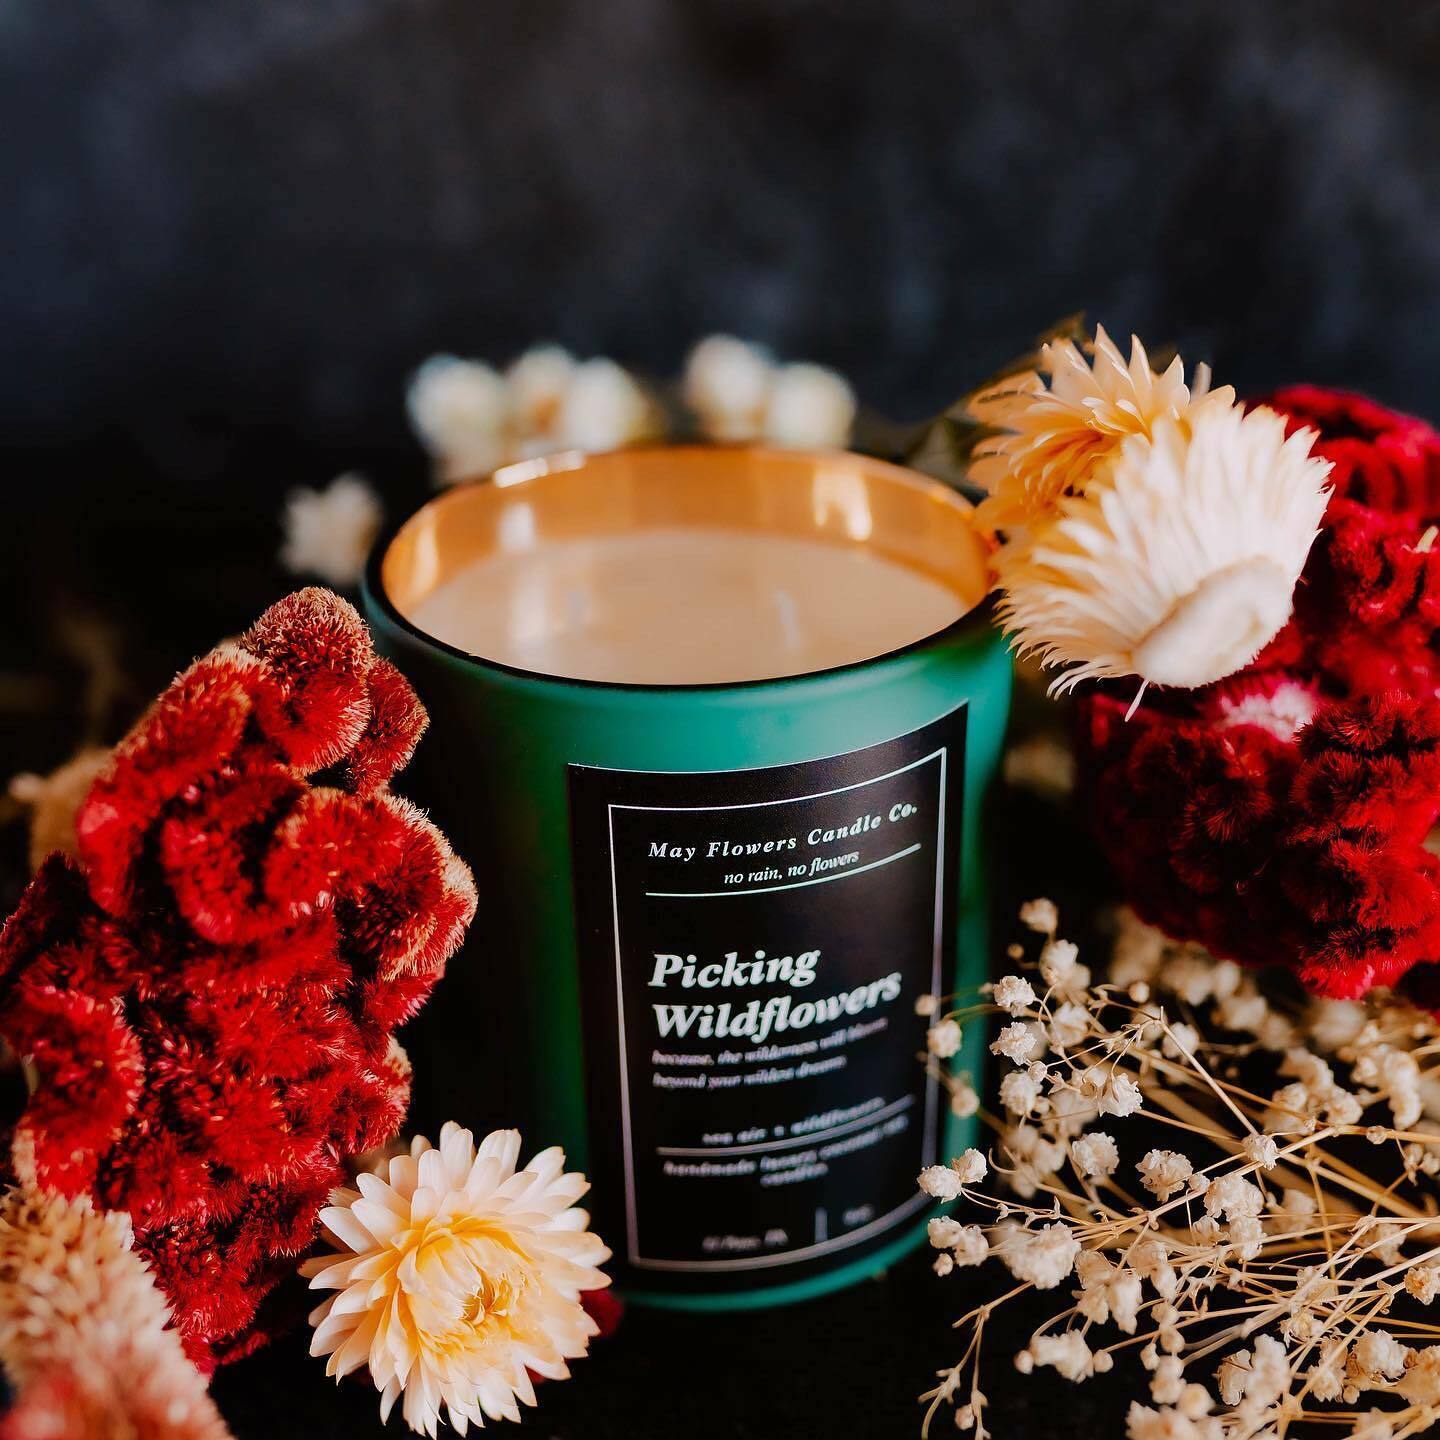 Spotted: May Flowers Candle Co.